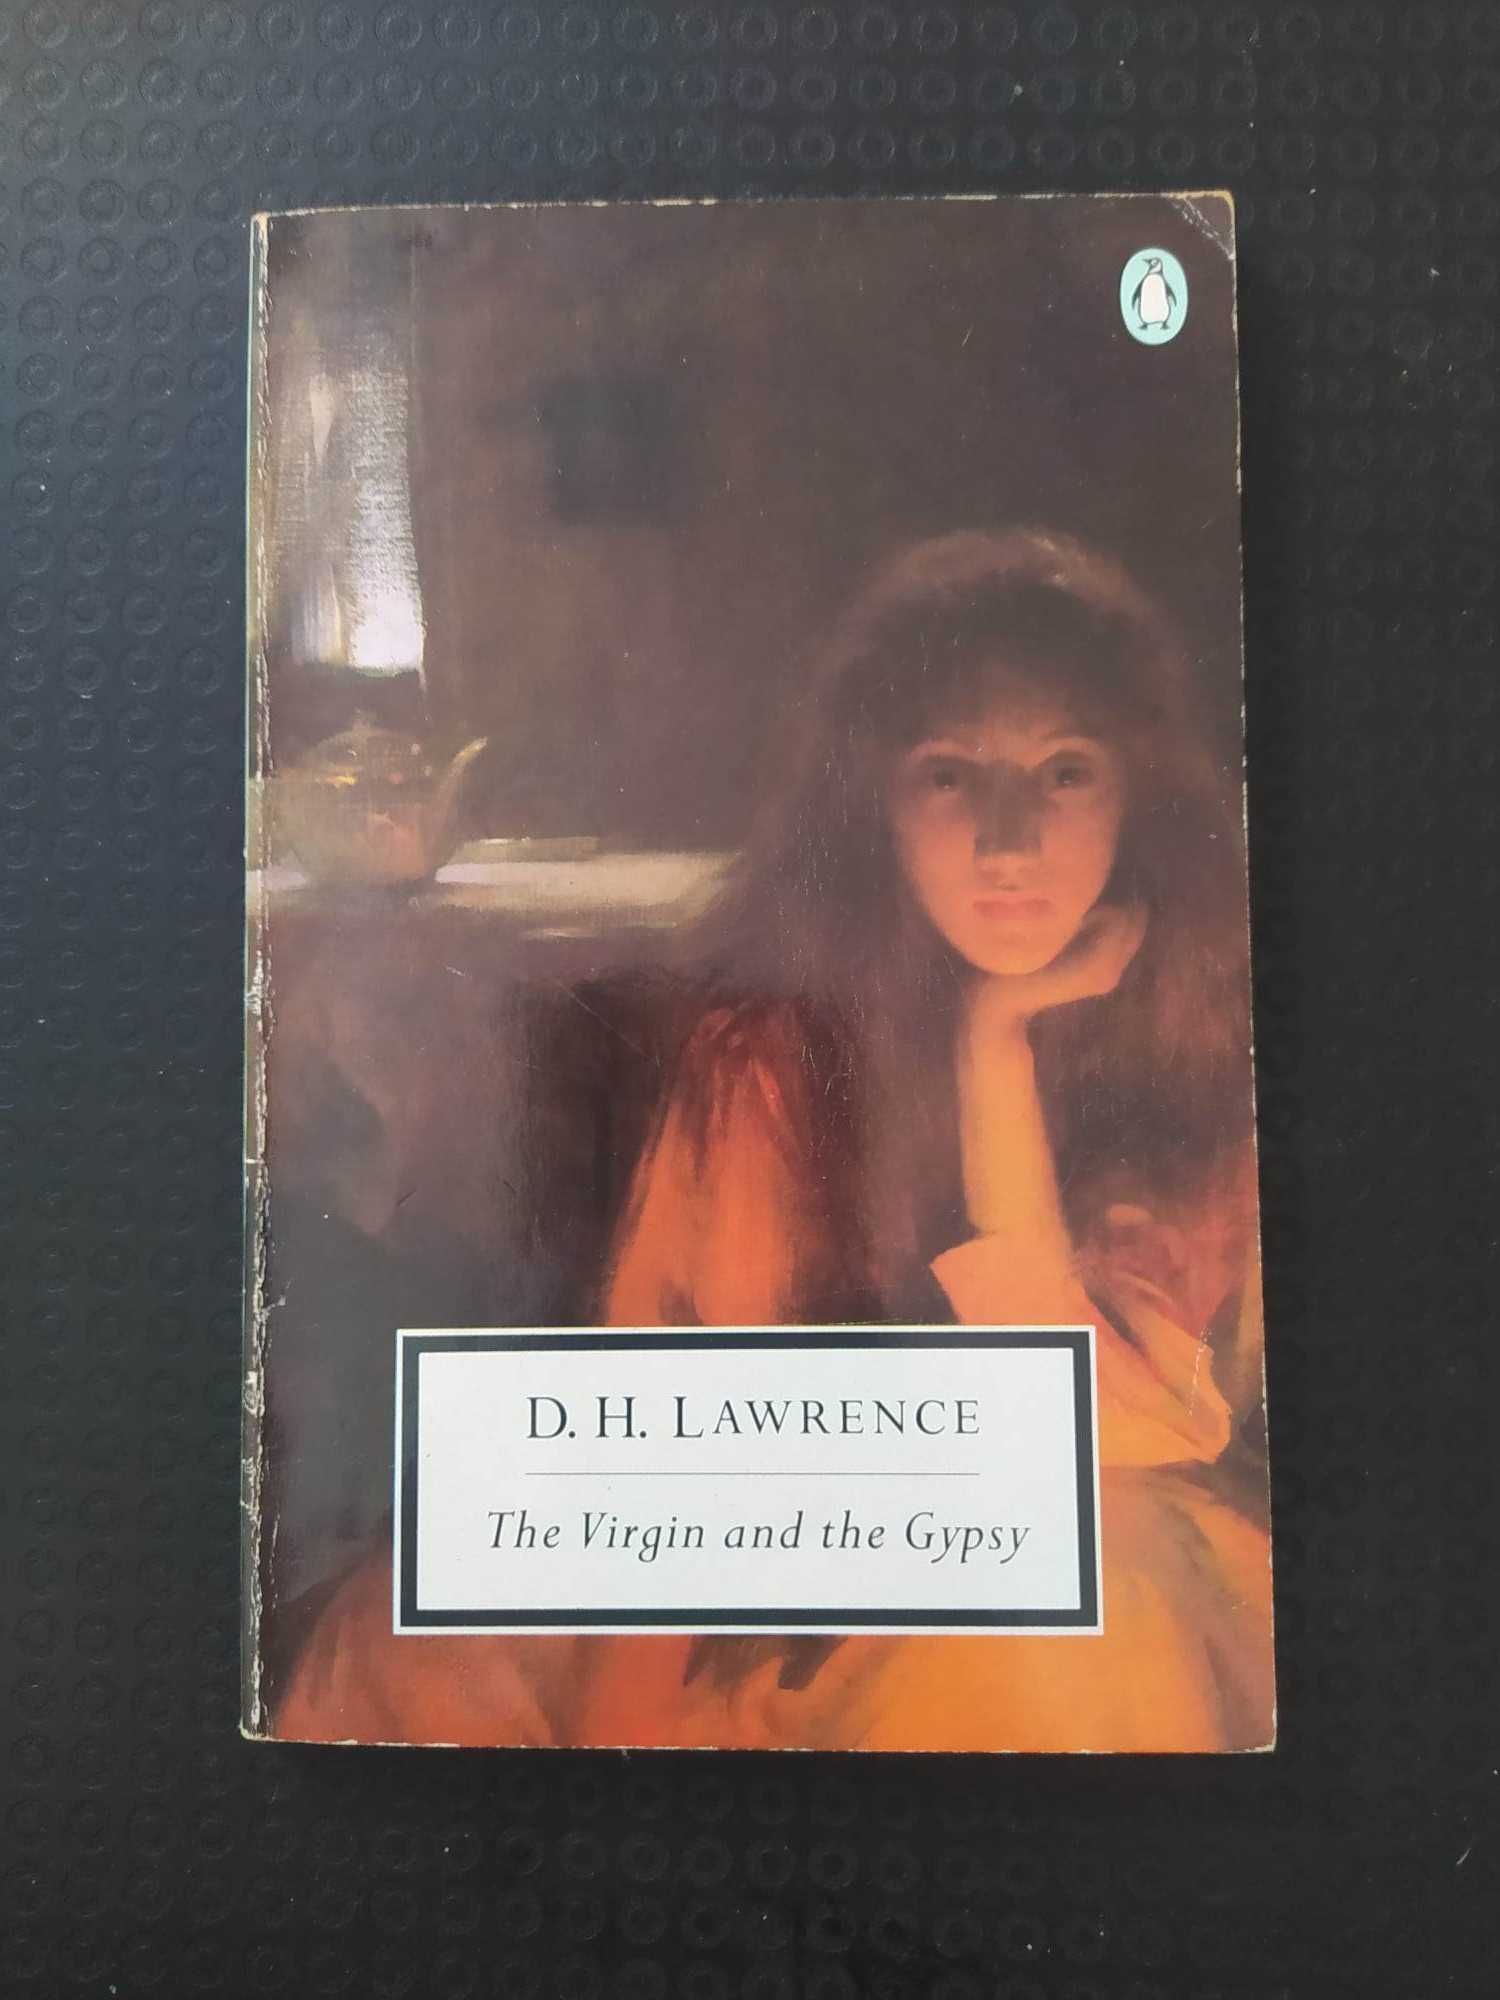 The Virgin and the Gipsy - D.H. Lawrence